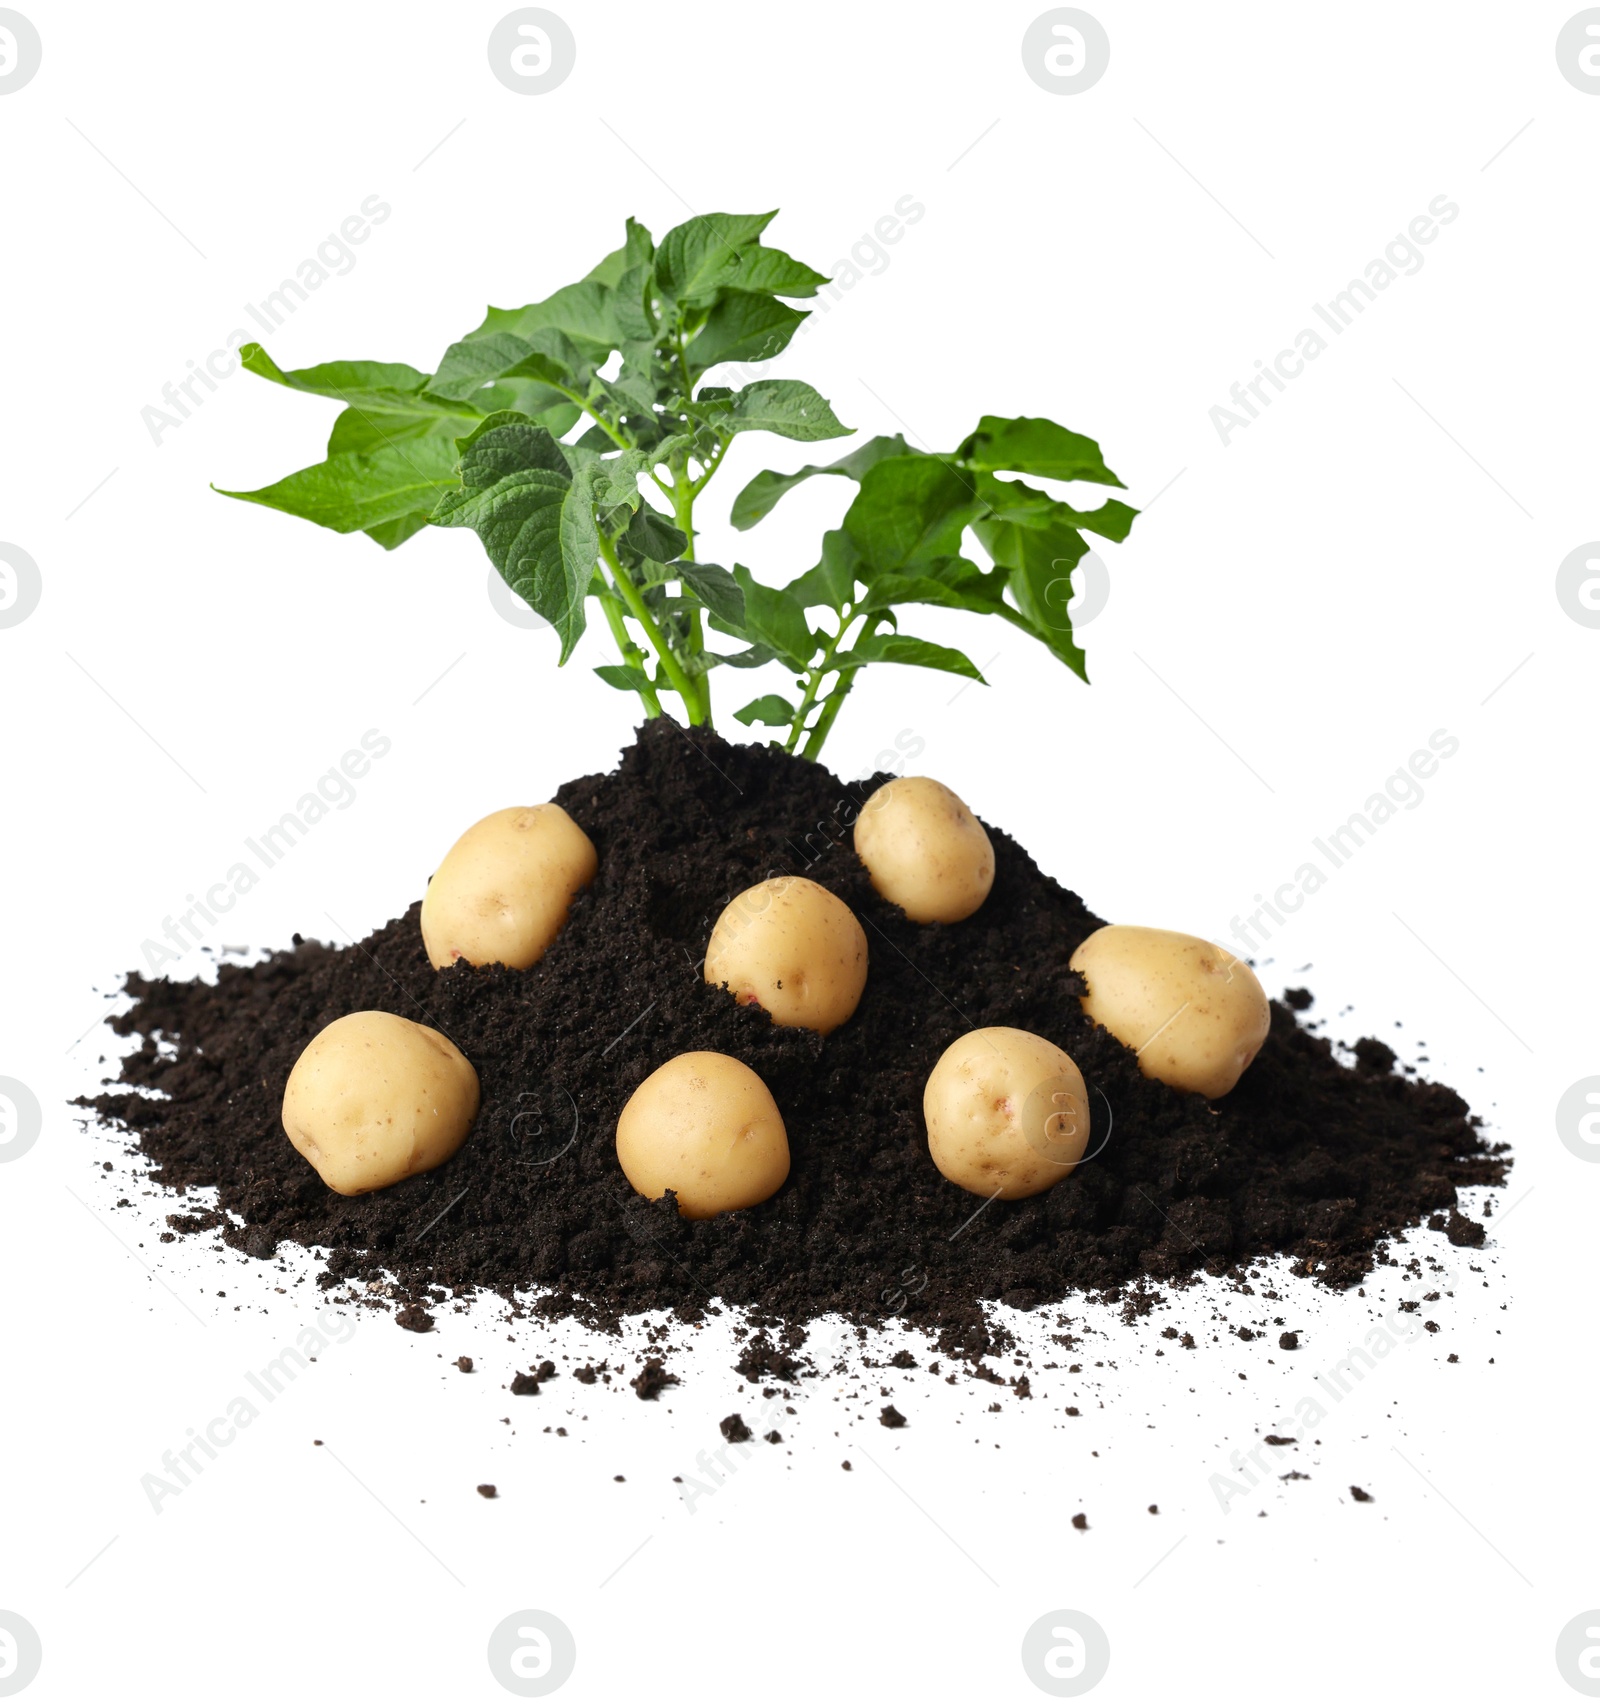 Photo of Potato plant with tubers and soil isolated on white